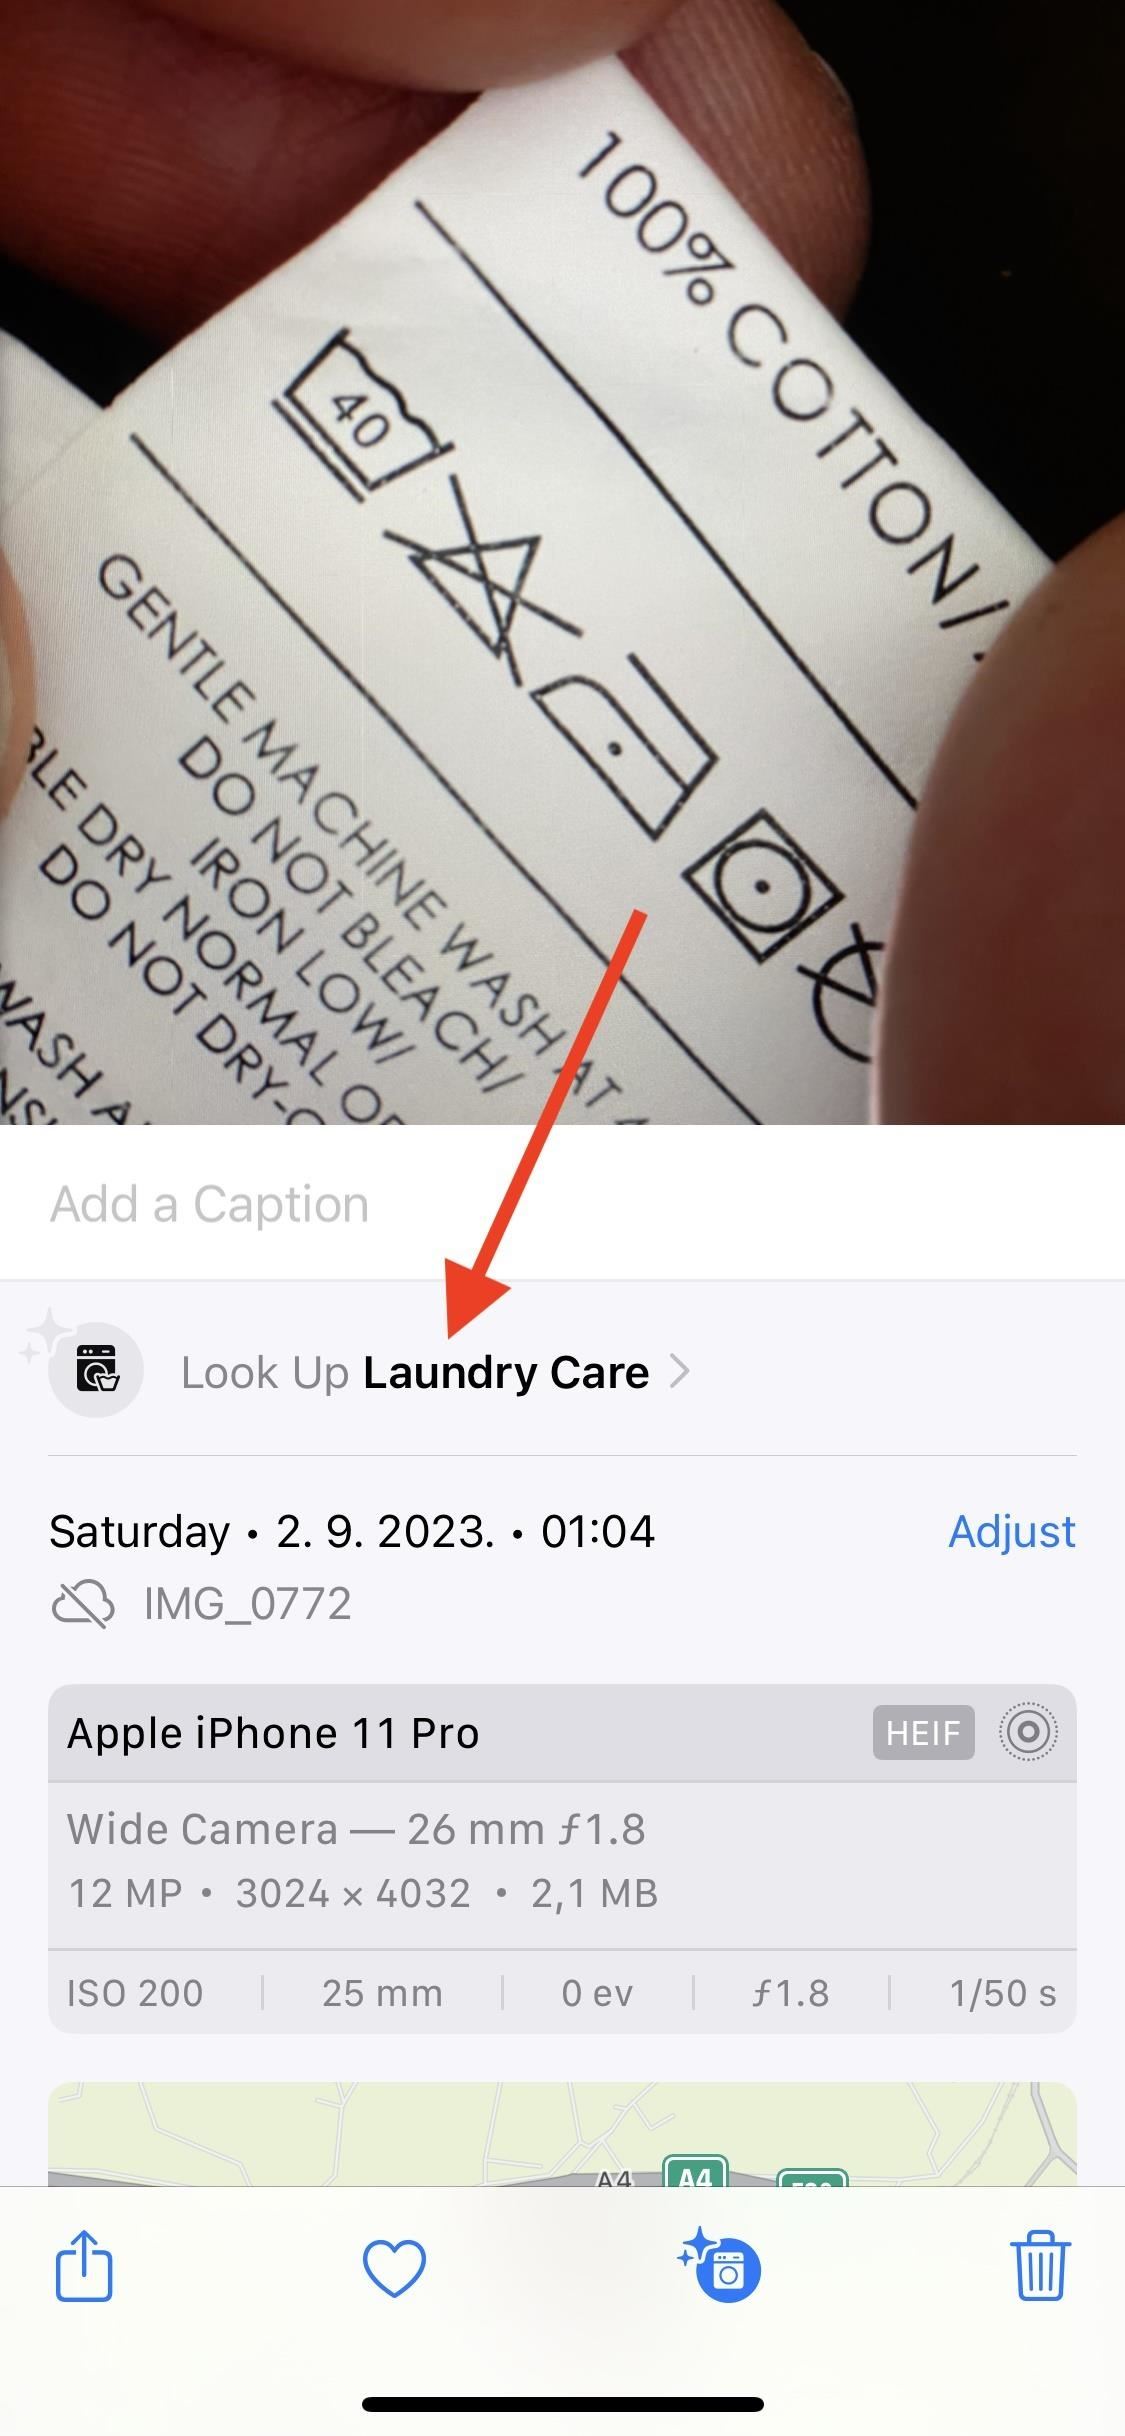 23 New Photo Features for Your iPhone You Need to Know About on iOS 17